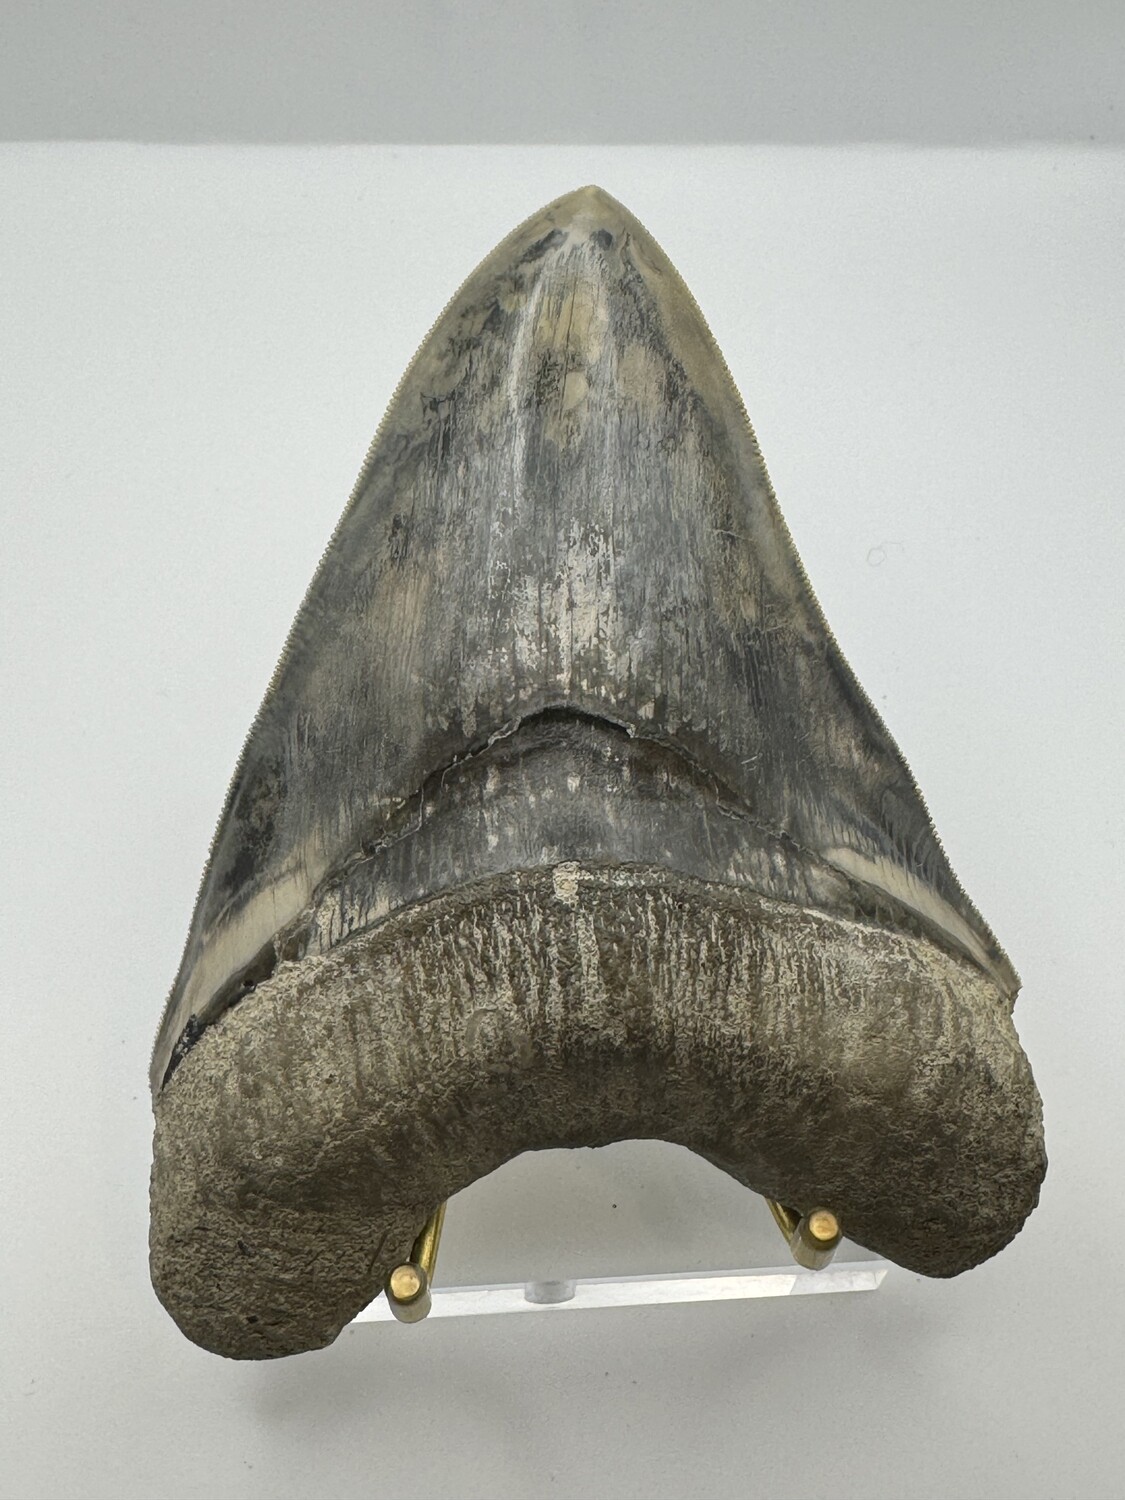 5.363" Megalodon Tooth fossil